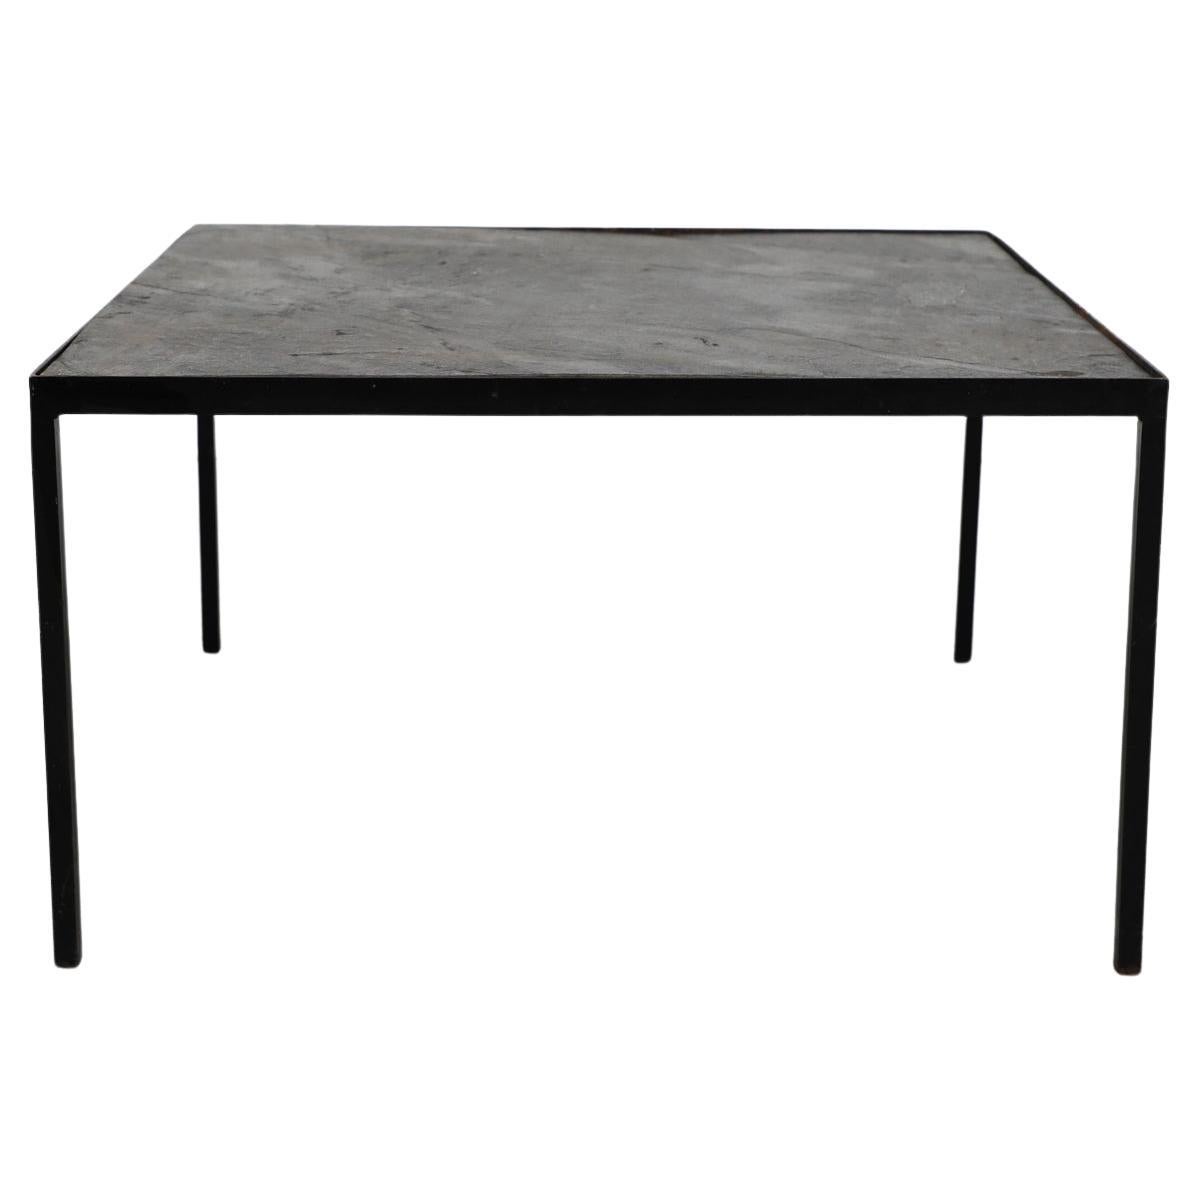 Artimeta Stone Top Coffee Table with Black Enameled Base For Sale